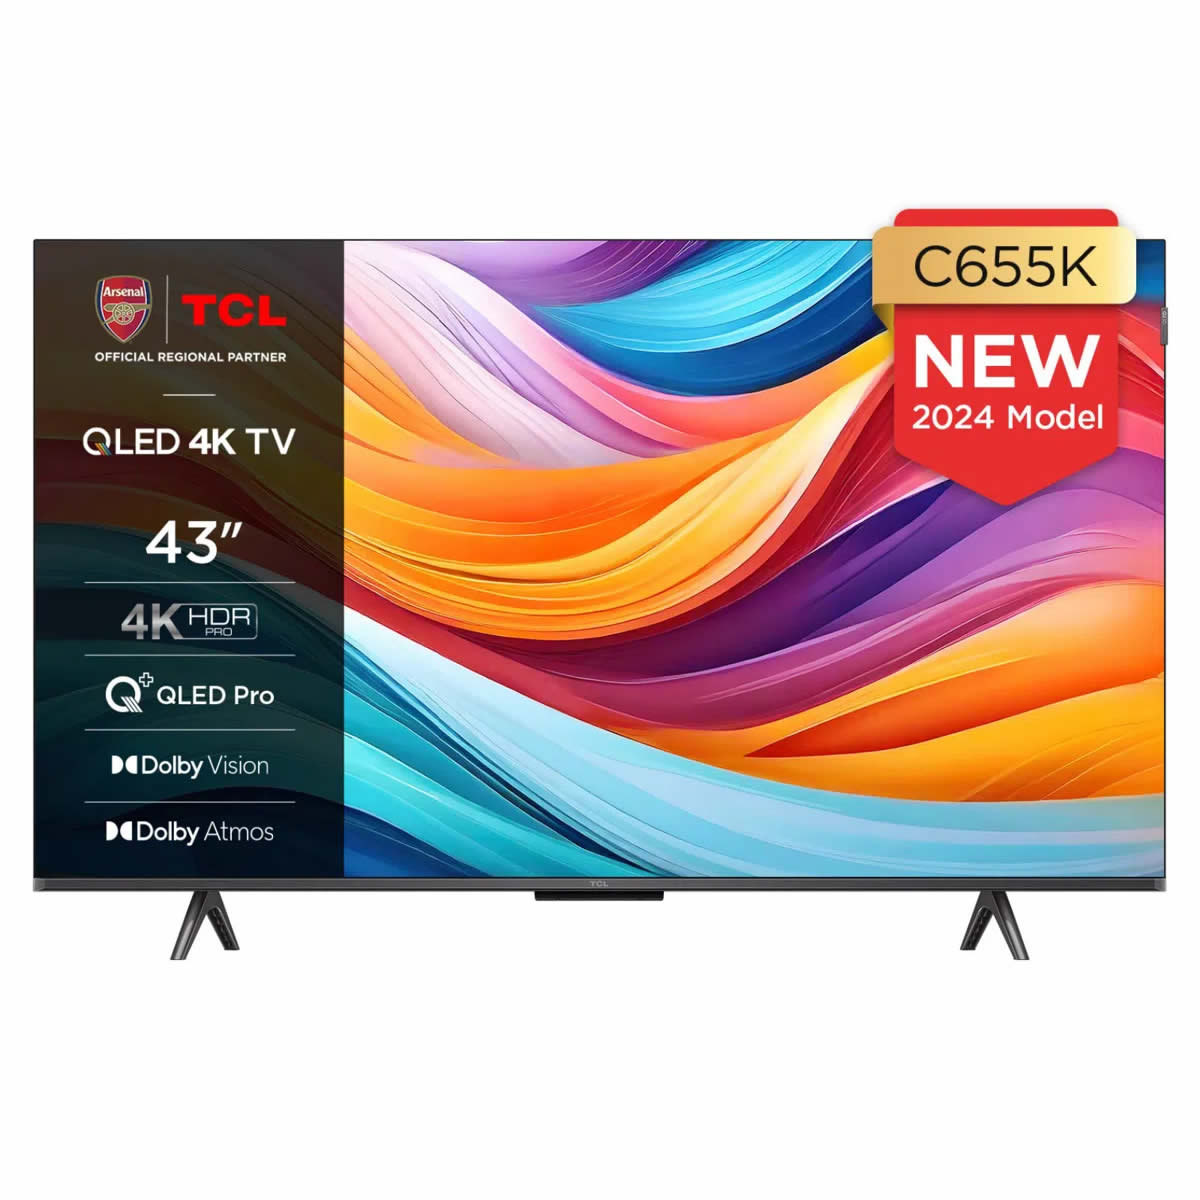 TCL 43inch 4K QLED PRO SMART TV WiFi Freeview HD Google